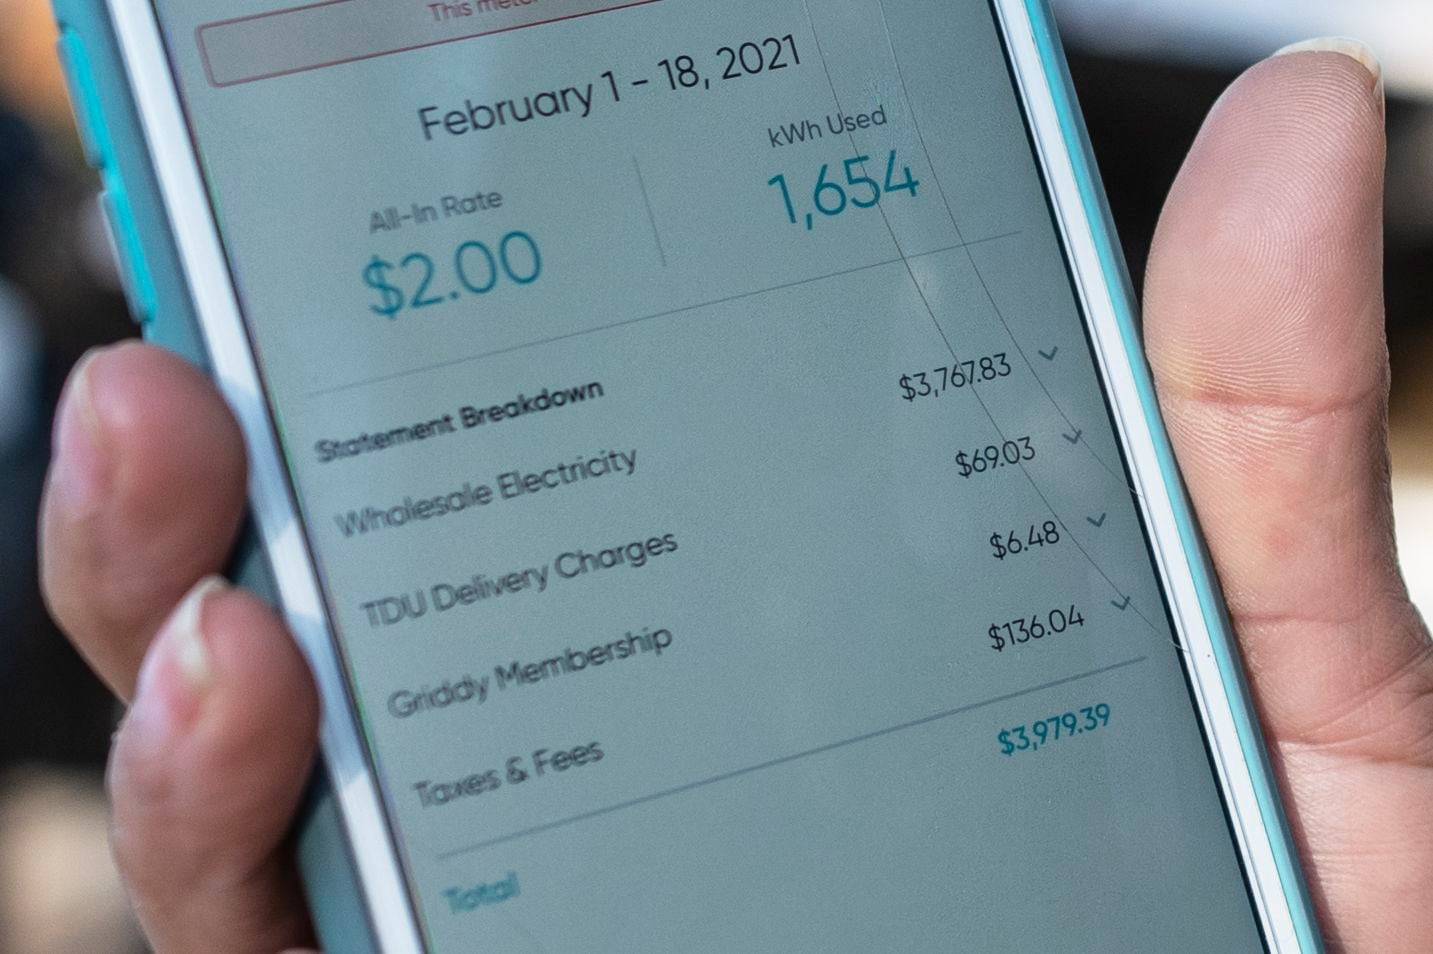 Ivet Cantu, 45, shows her electricity bill from Griddy energy on an app totaling $3,979.39...